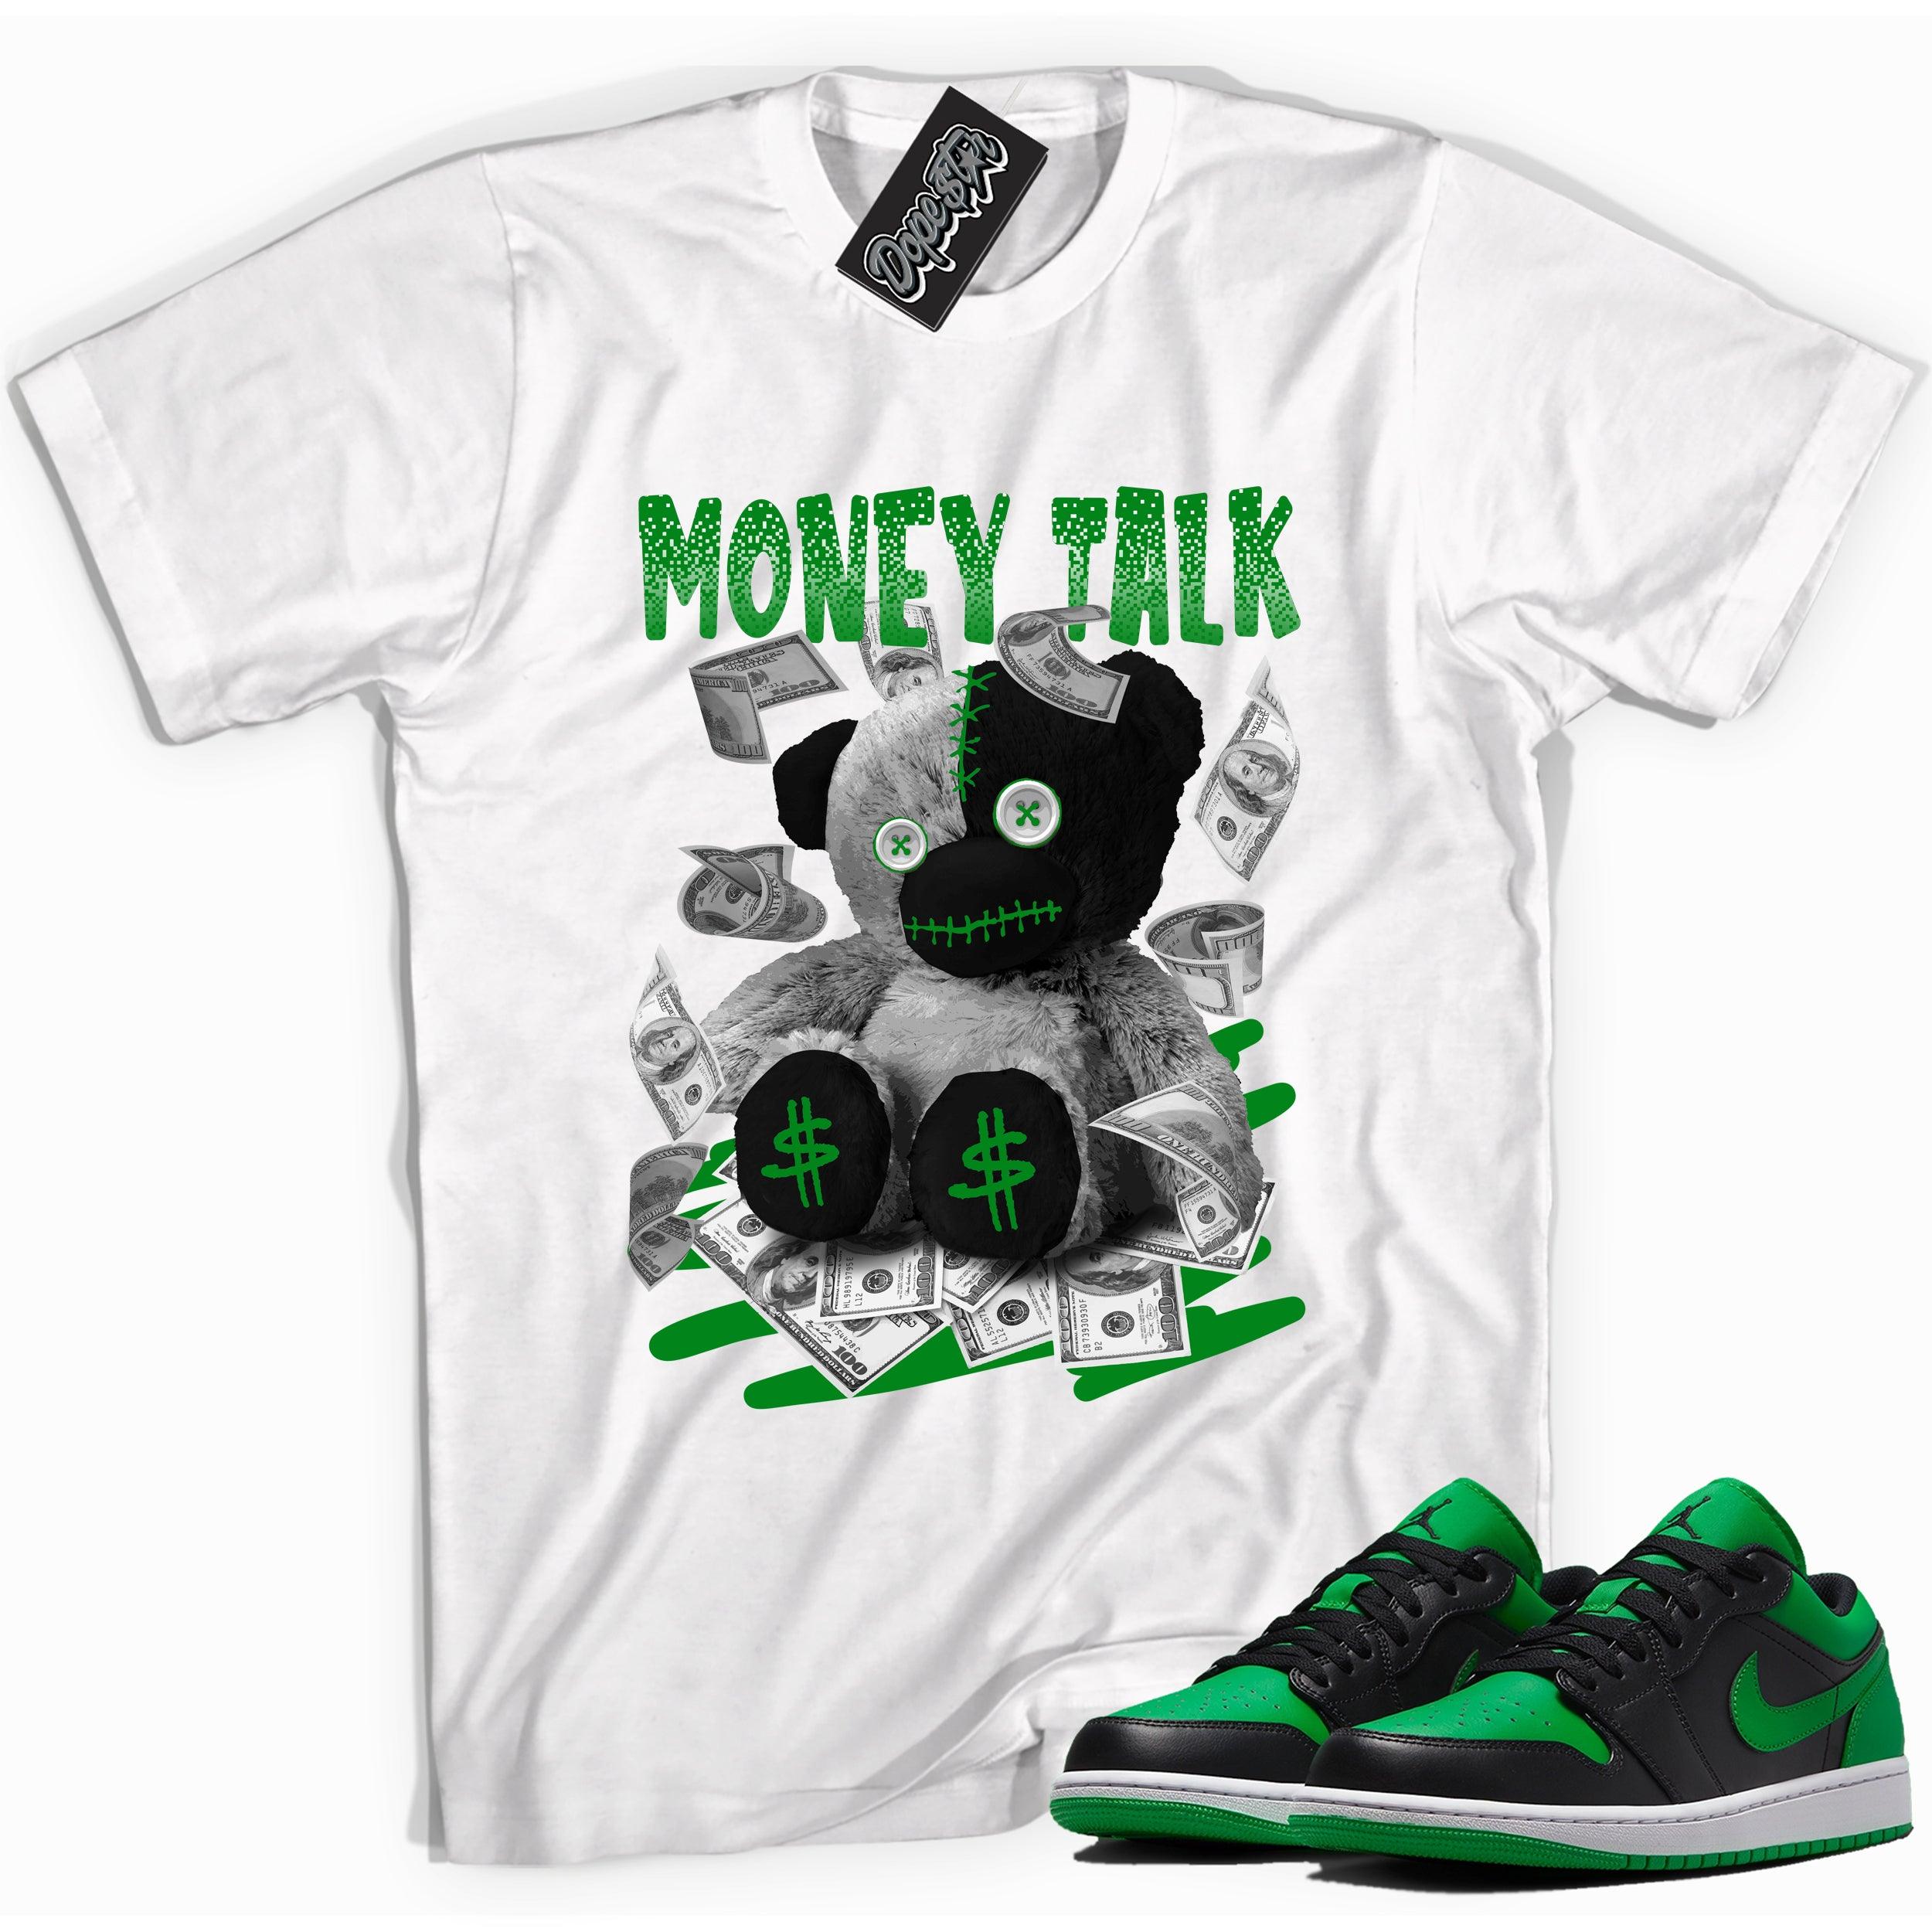 Cool white graphic tee with 'money talk bear' print, that perfectly matches Air Jordan 1 Low Lucky Green sneakers